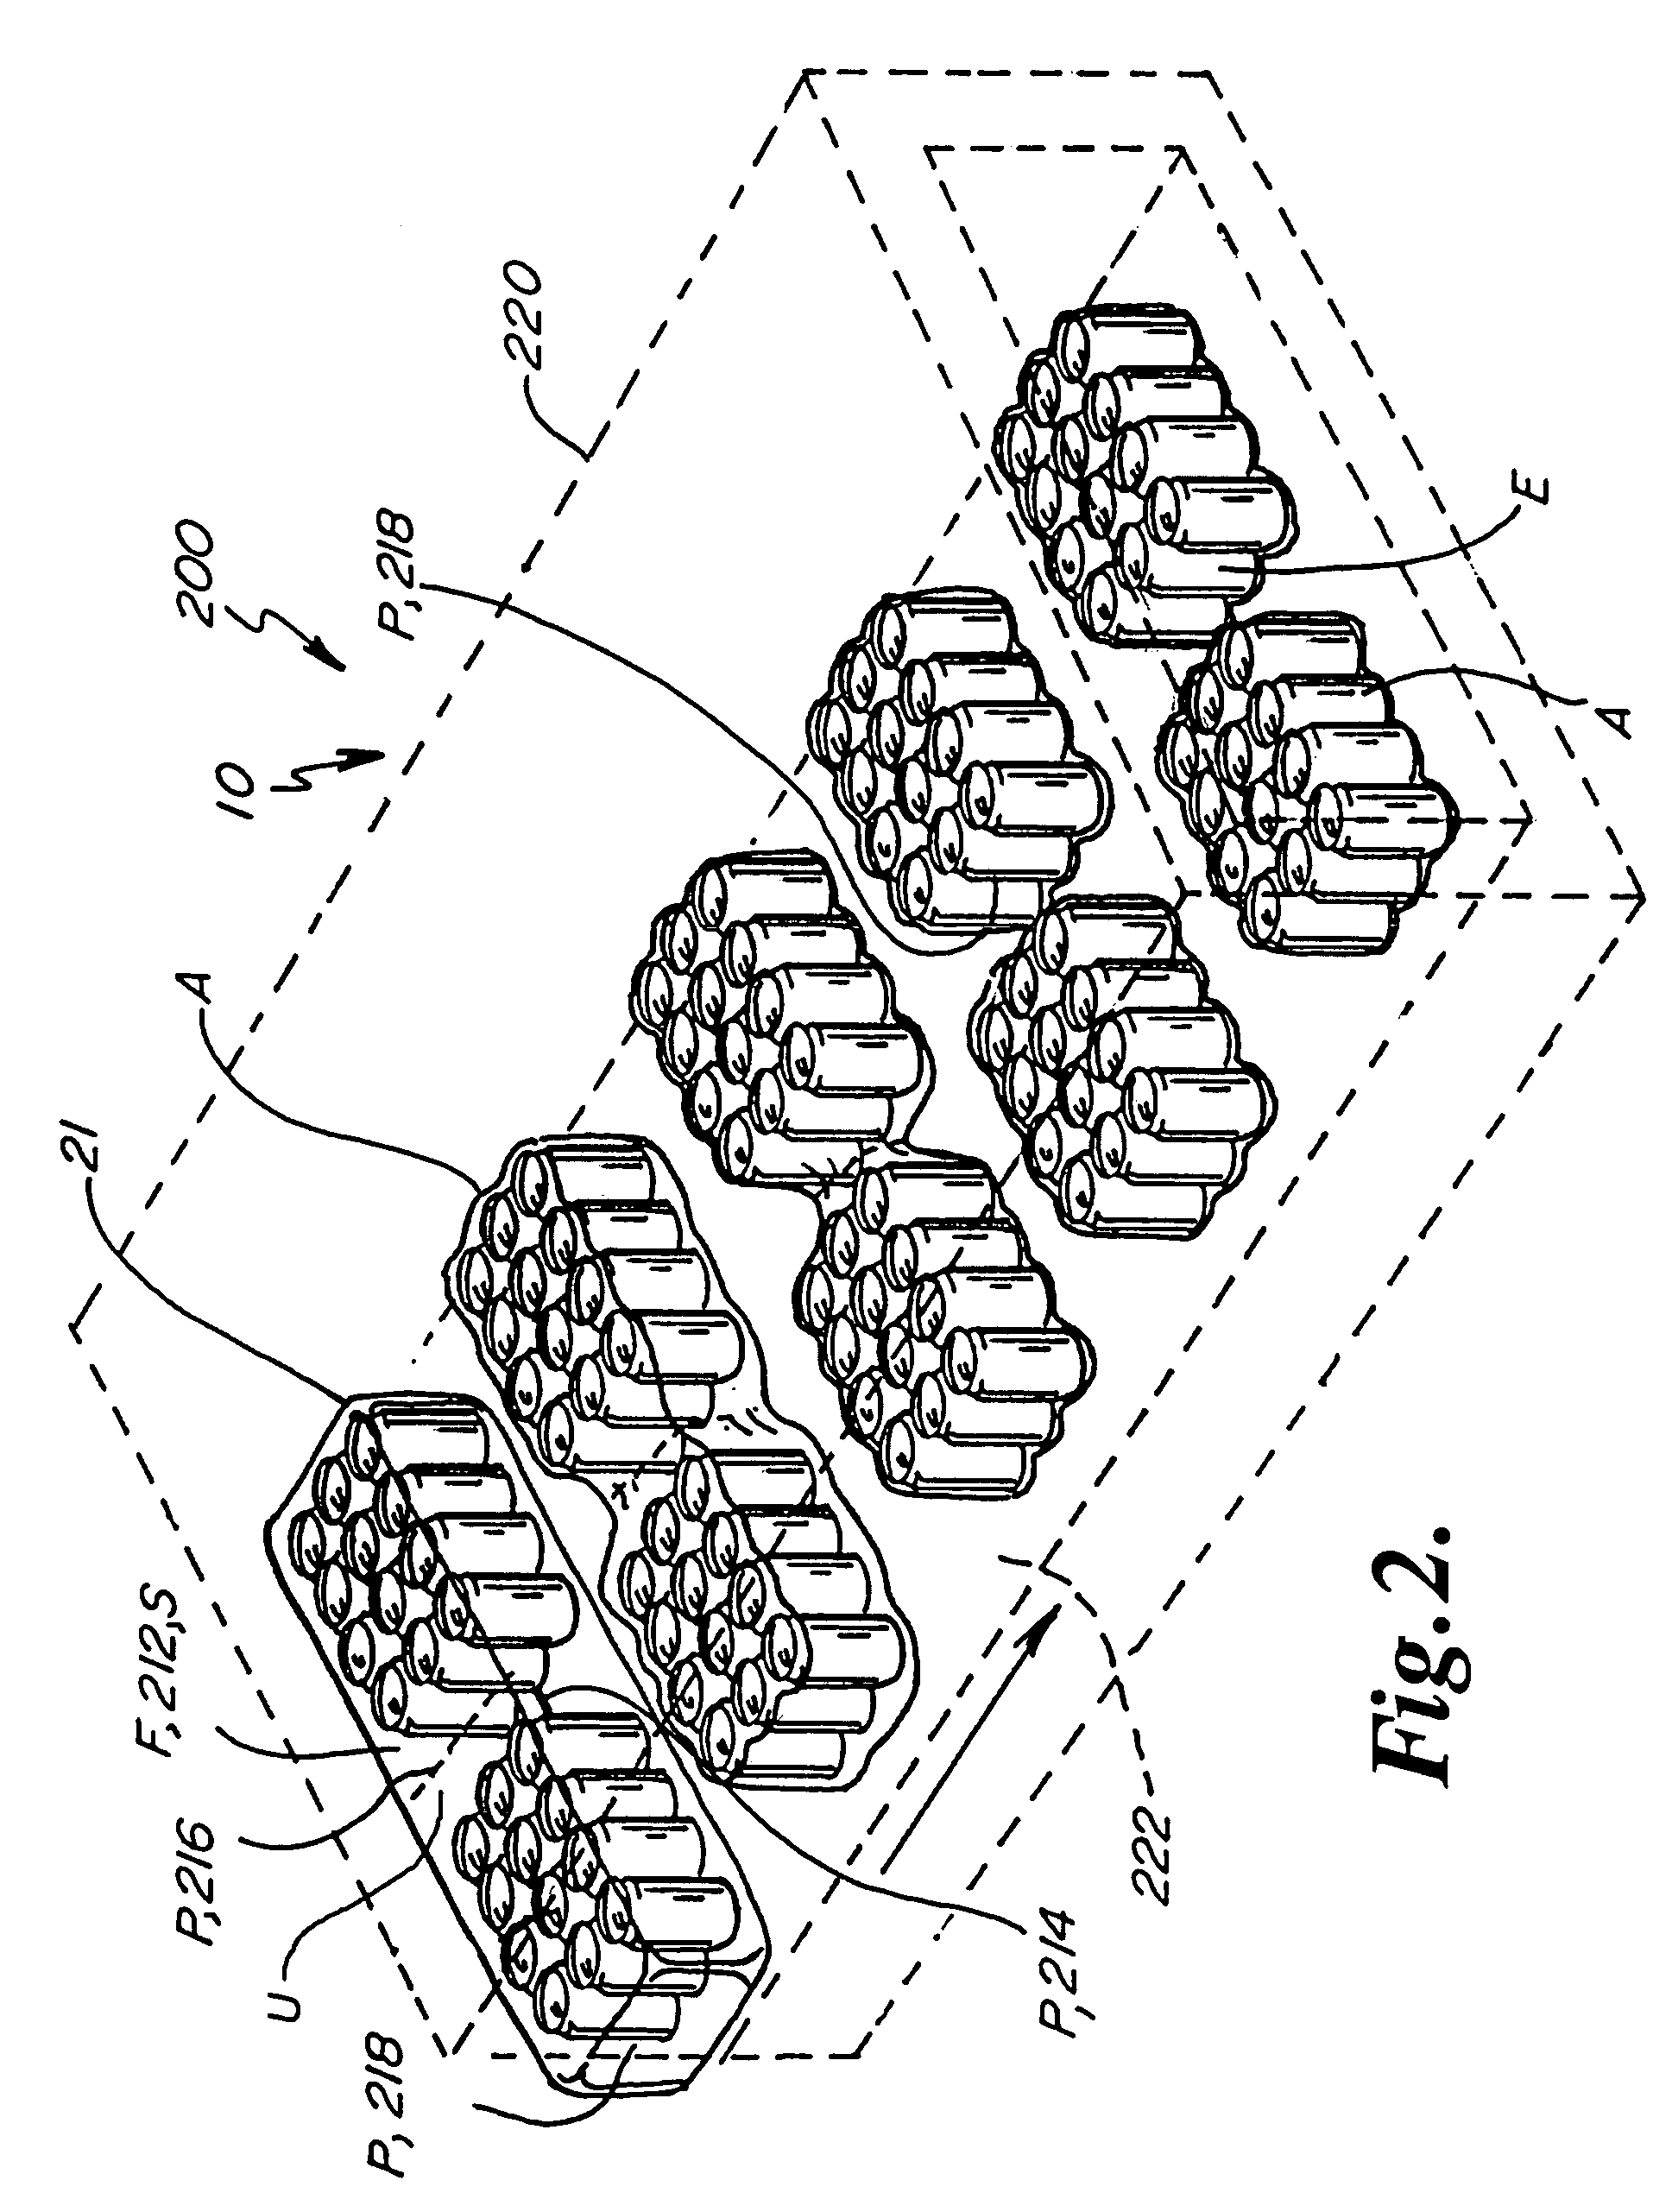 Apparatus and method for selective processing of materials with radiant energy